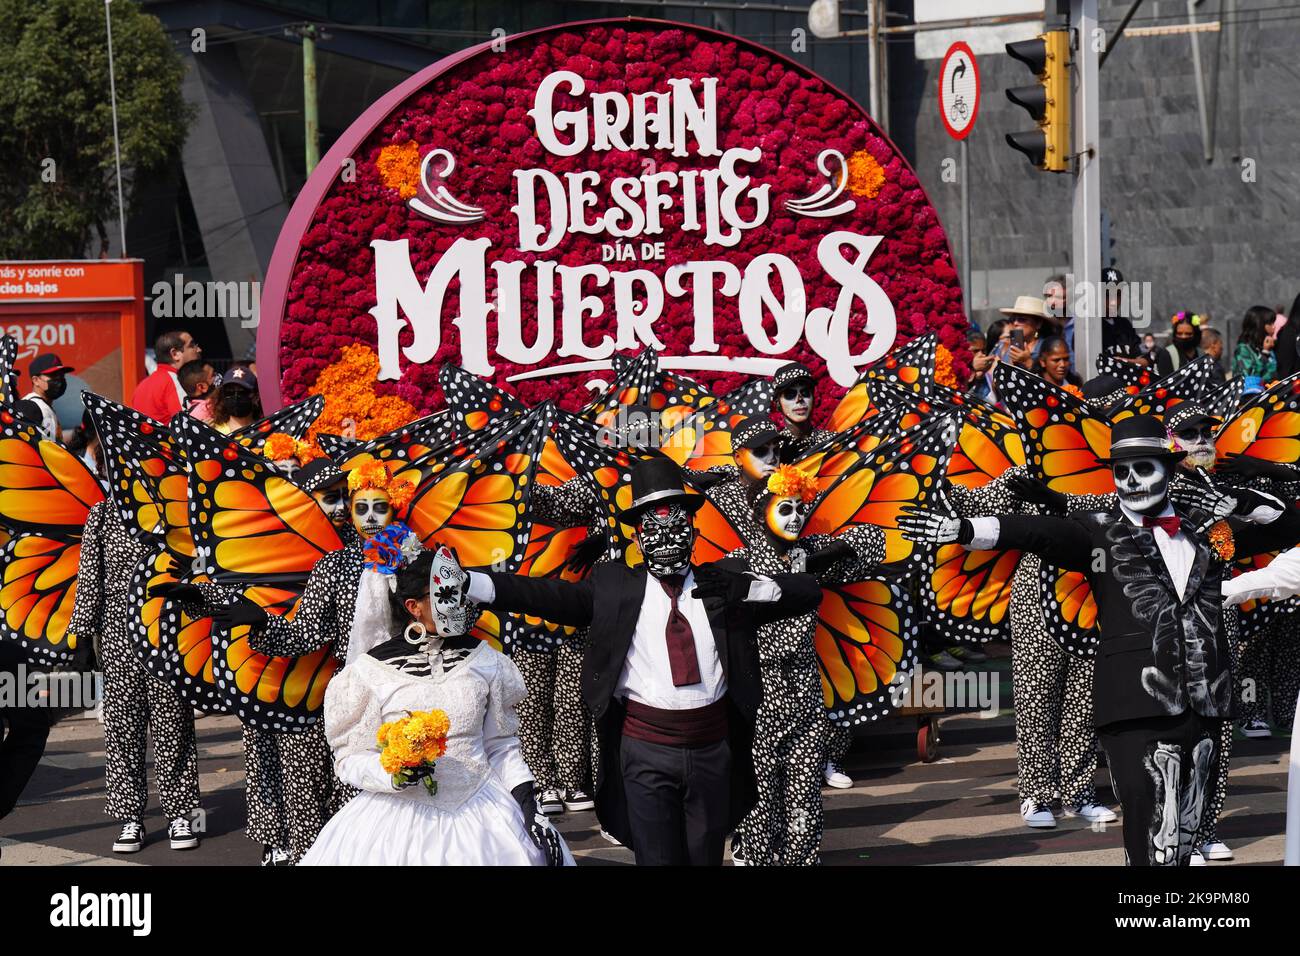 Mexico City, Mexico. 29th Oct, 2022. Monarch butterfly costumed performers perform during the Grand Parade of the Dead to celebrate Dia de los Muertos holiday on Paseo de la Reforma, October 29, 2022 in Mexico City, Mexico. Credit: Richard Ellis/Richard Ellis/Alamy Live News Stock Photo